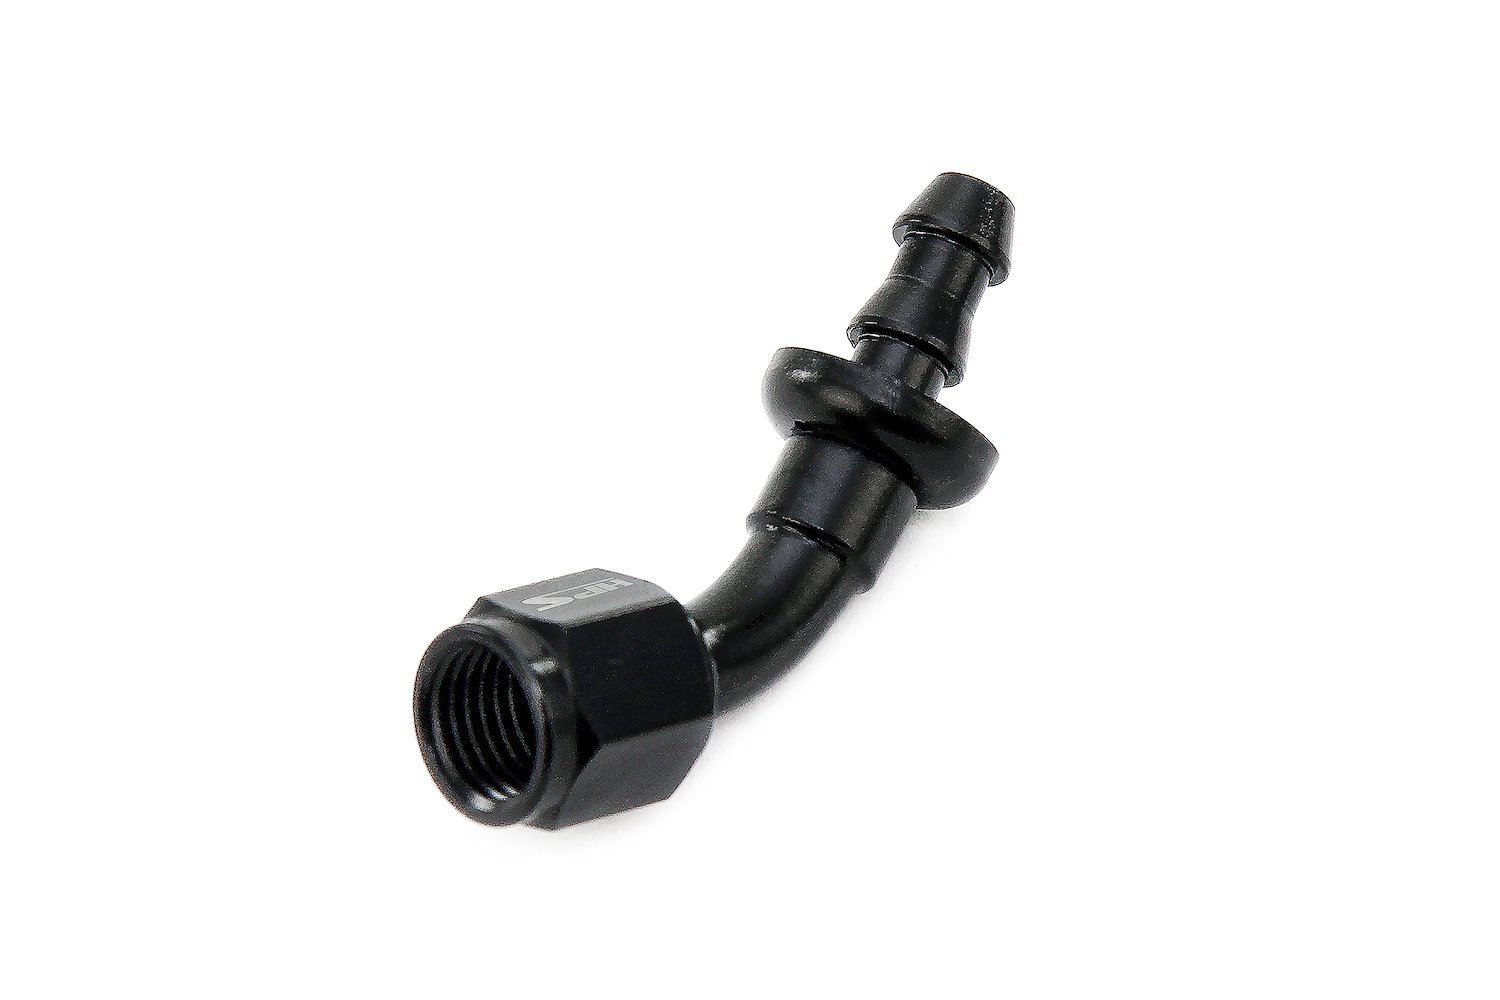 150-4504 150 Series 45-Deg Hose End, Tool-Free Assembly Hose Ends, For Push-On Style Hoses, Easy To Use